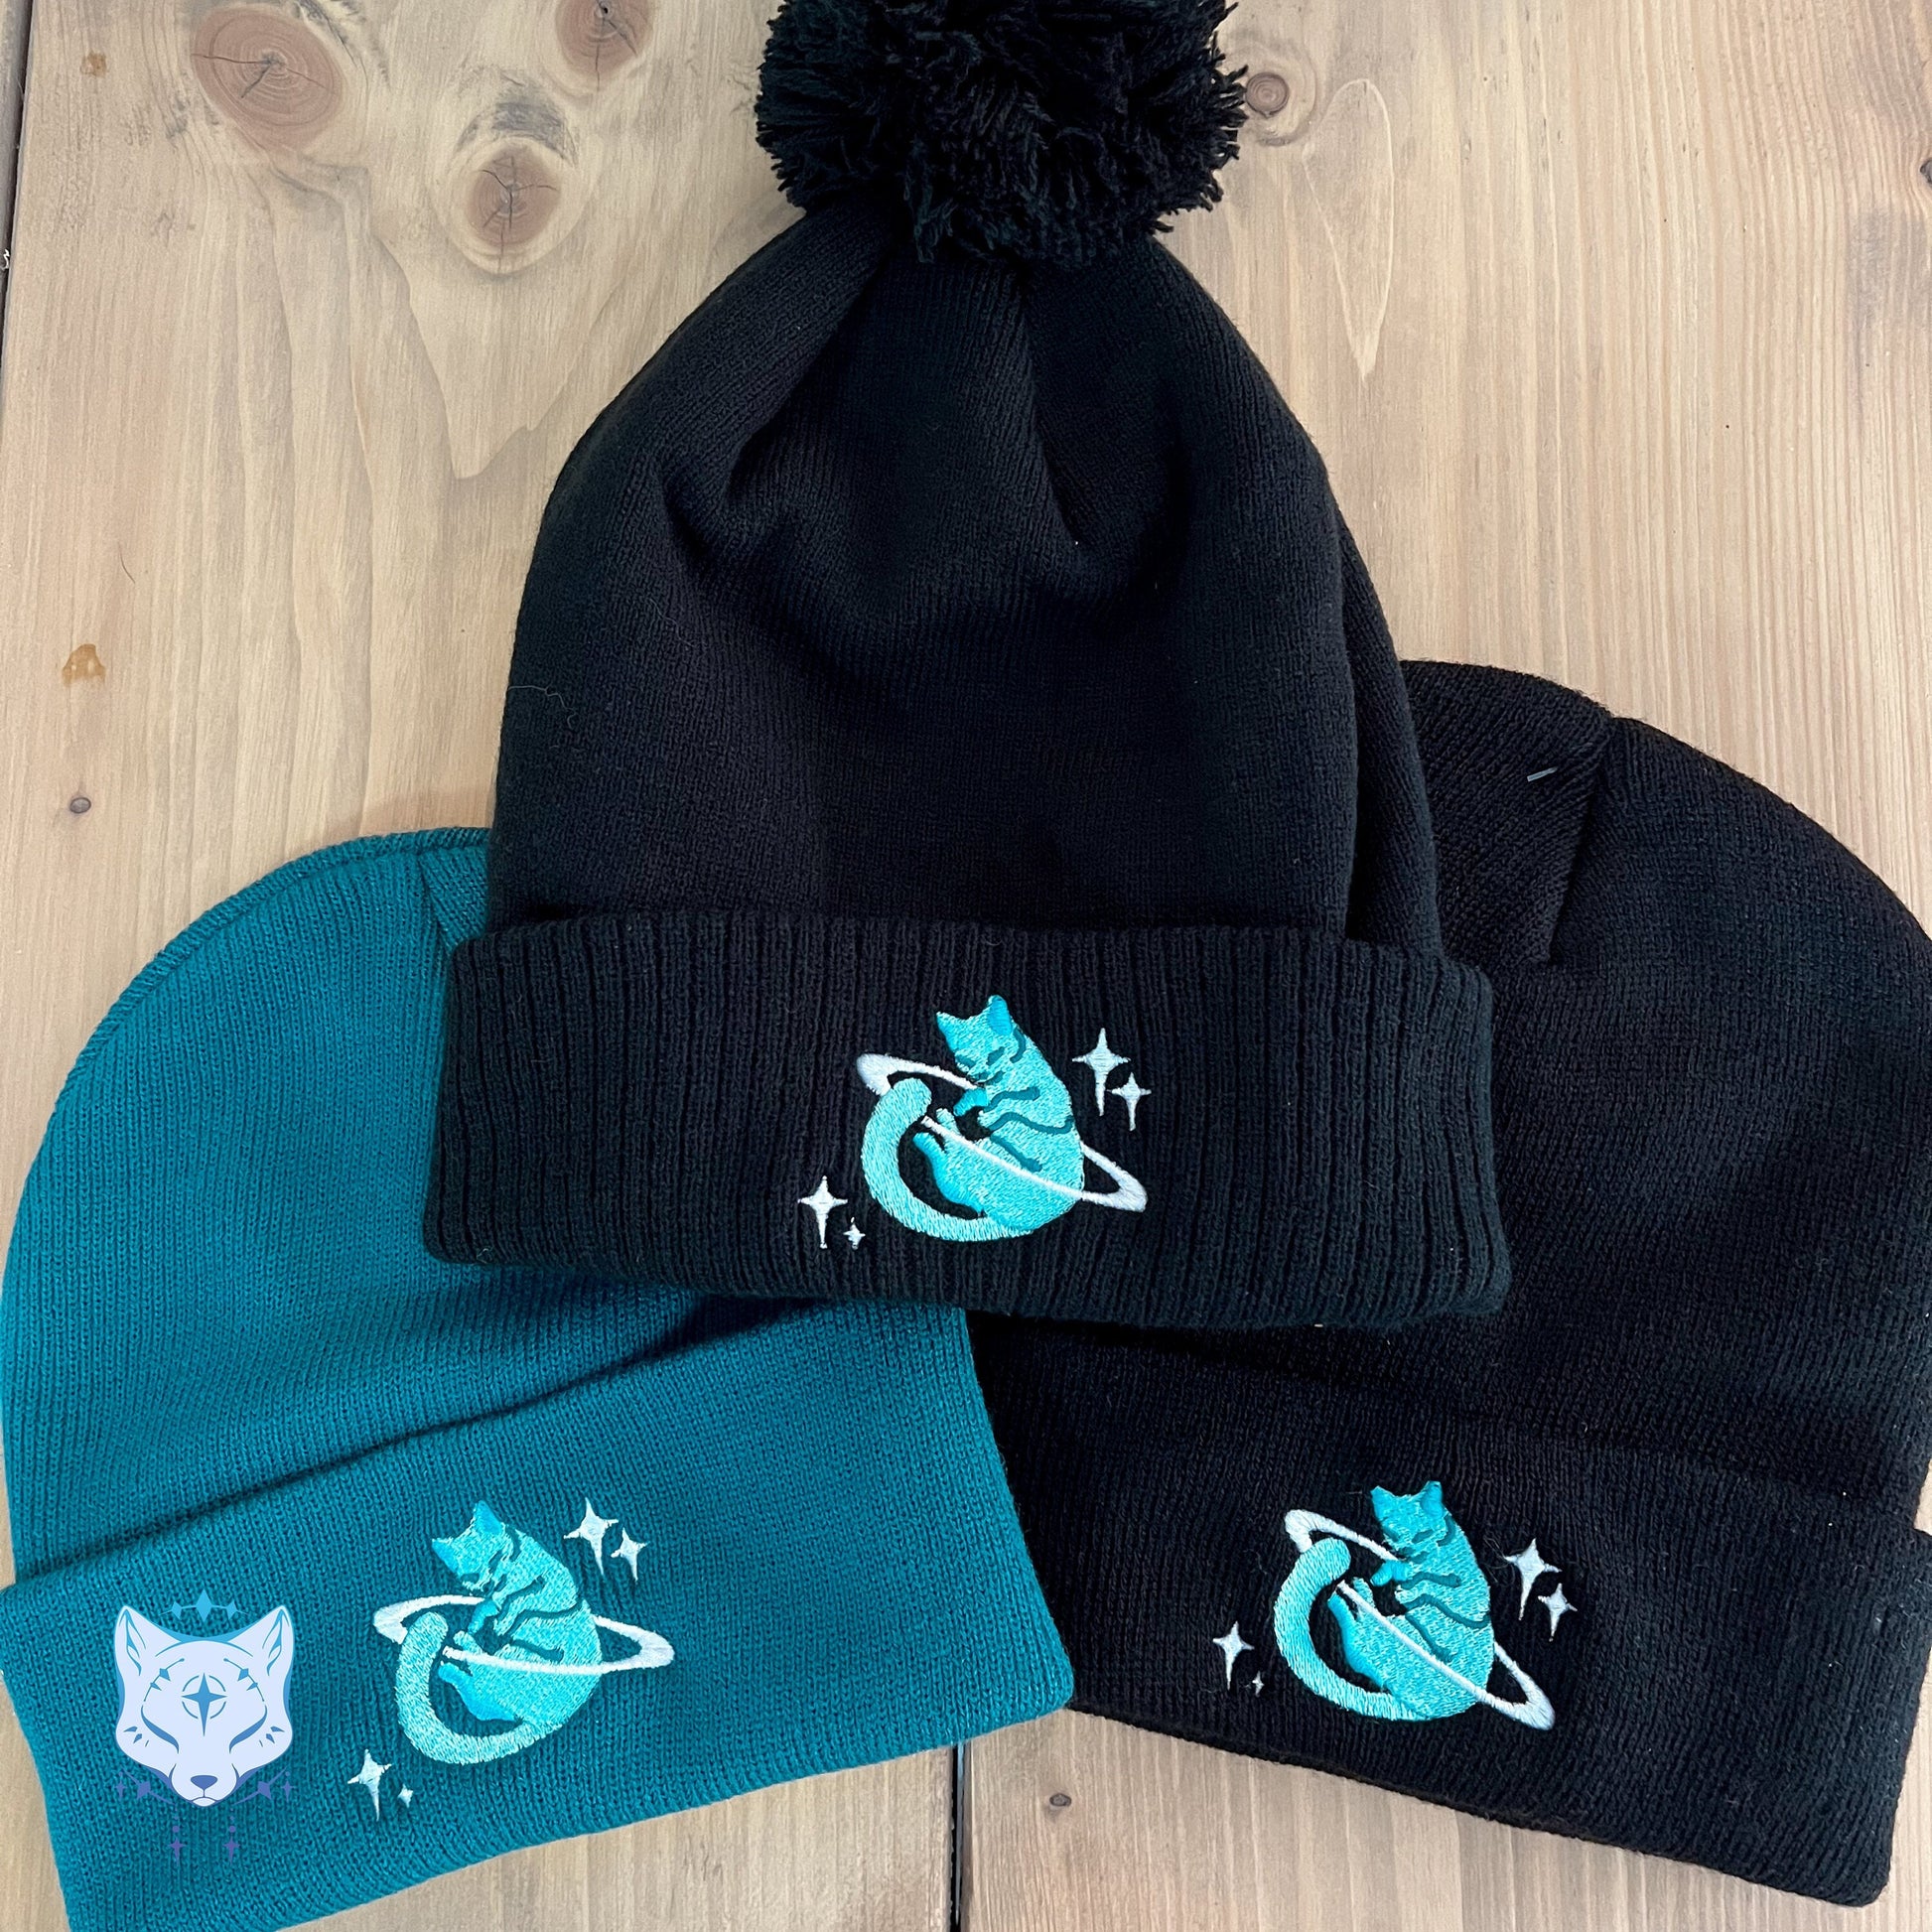 Space Cat Beanie Hat - Fleece Lined Bobble or Thinsulate beanie